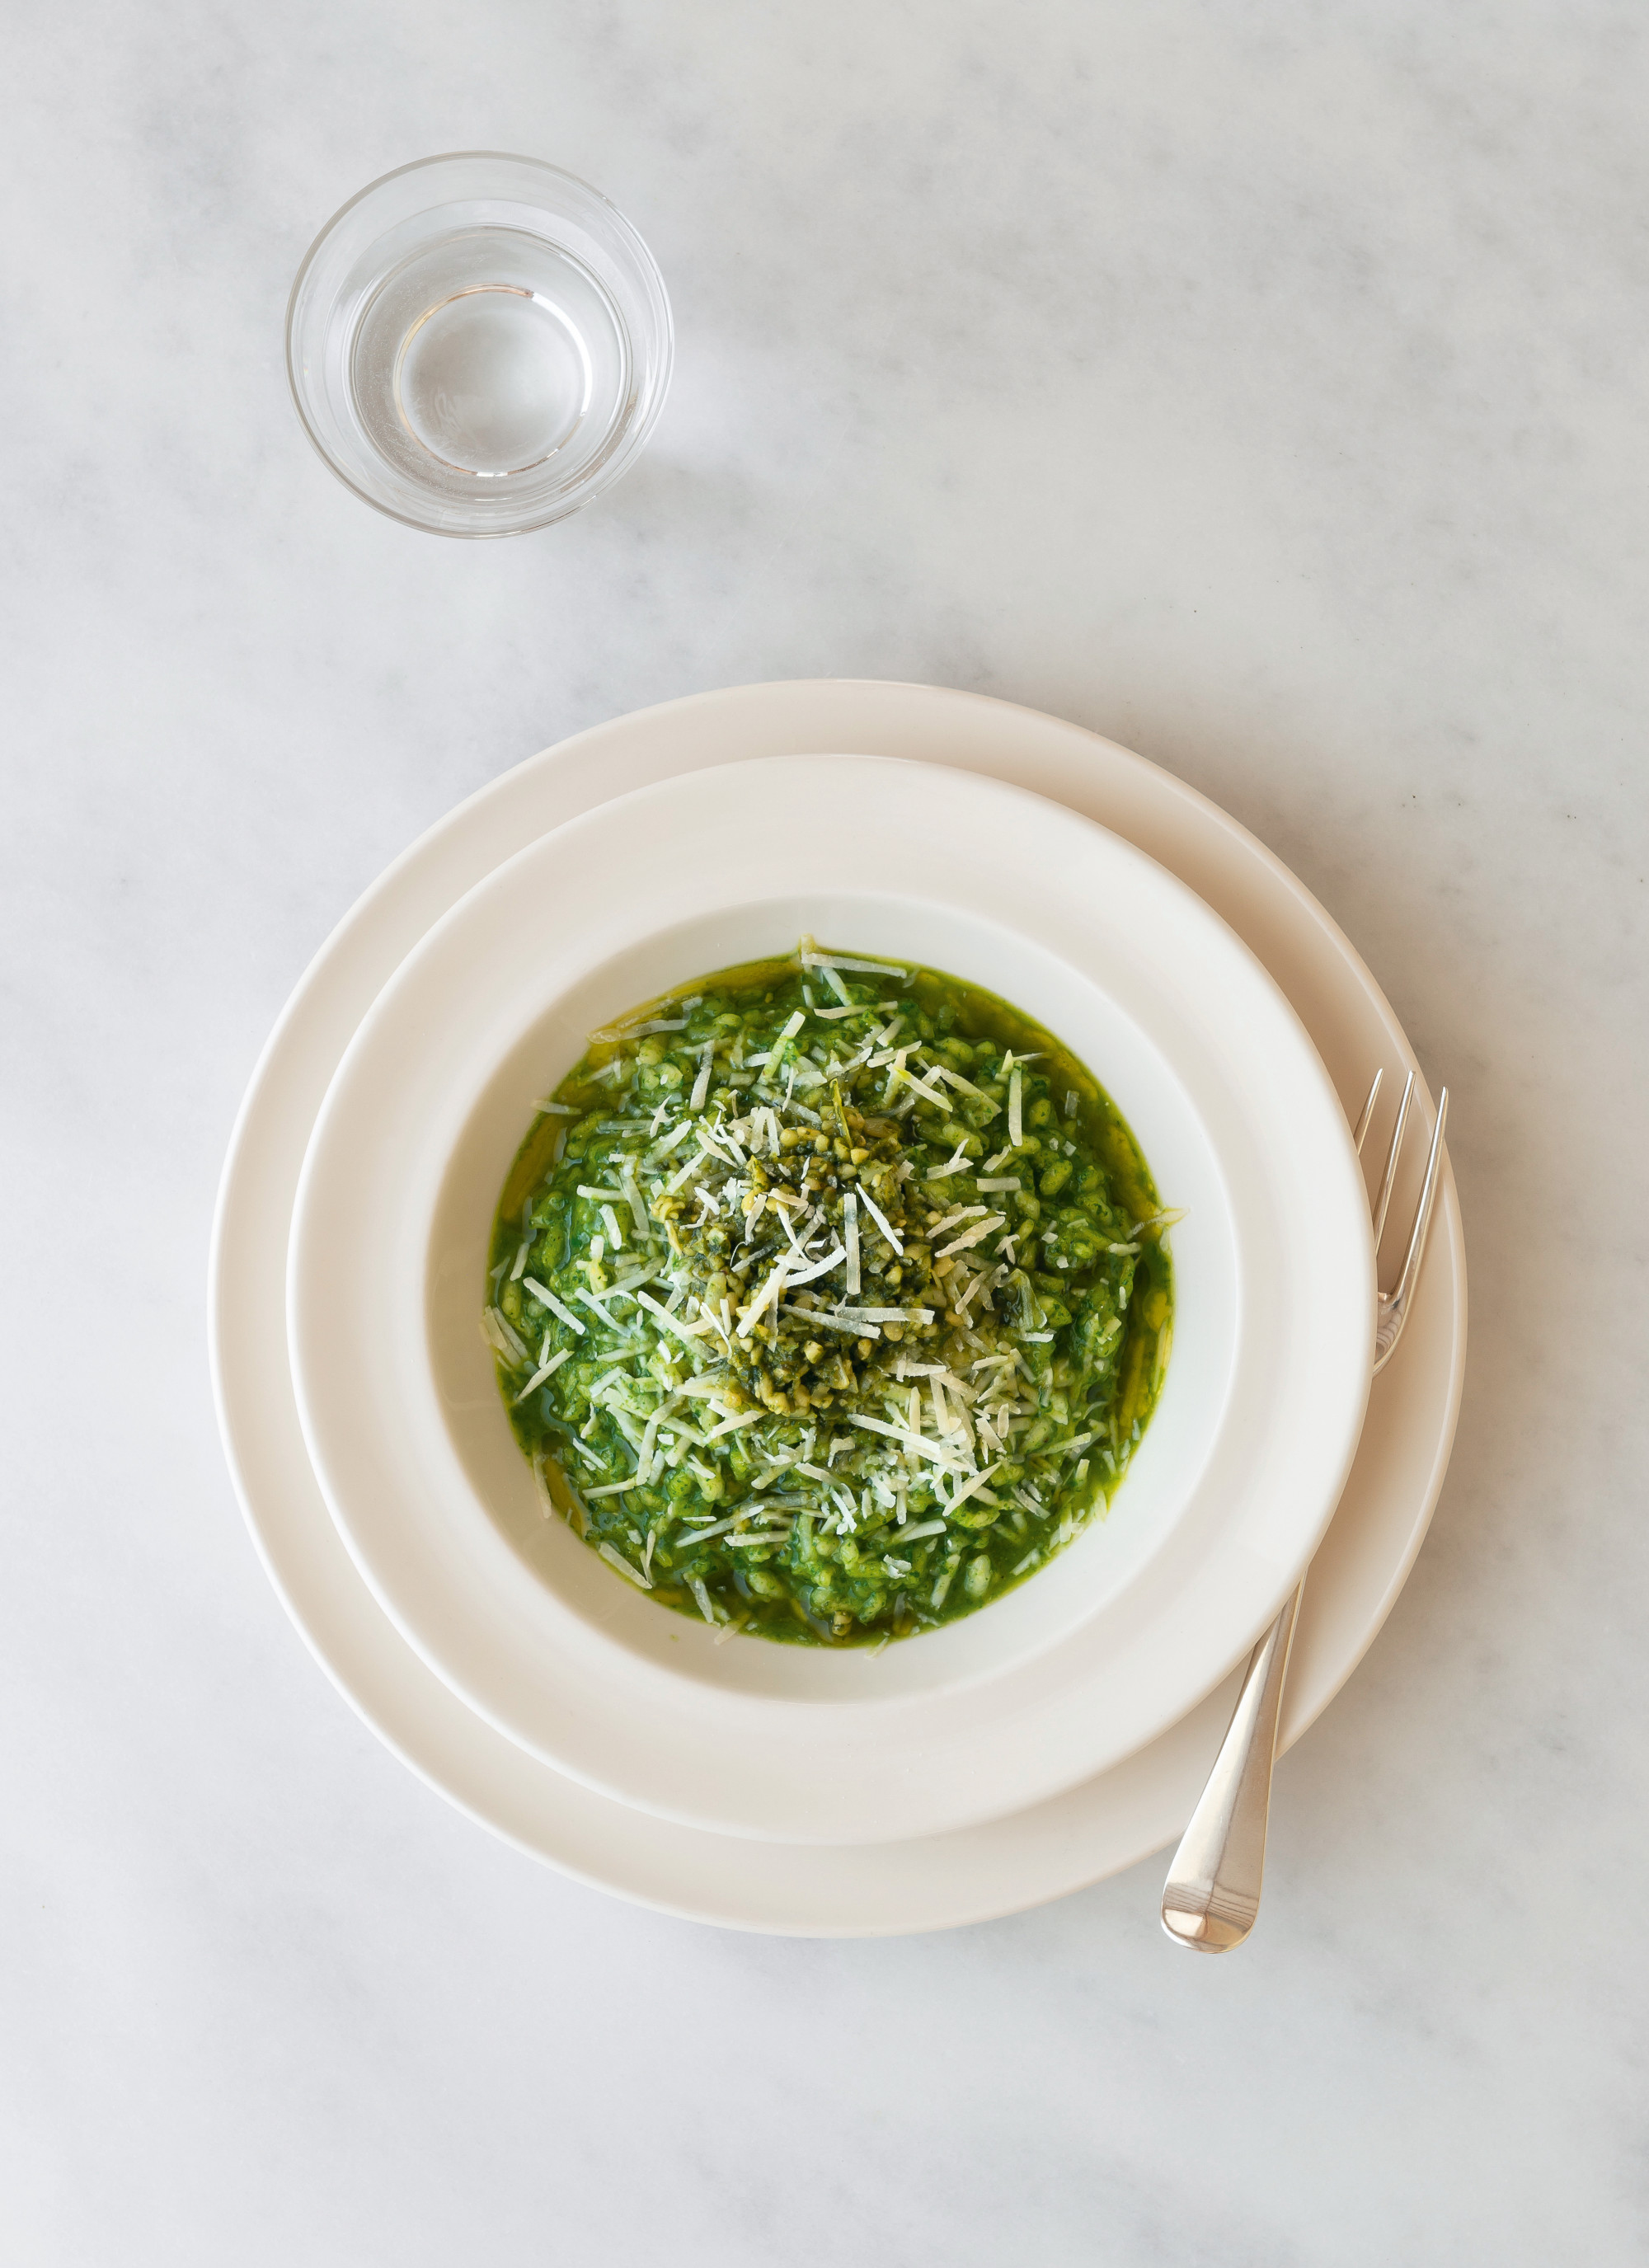 Nettle risotto - from Home Farm Cooking